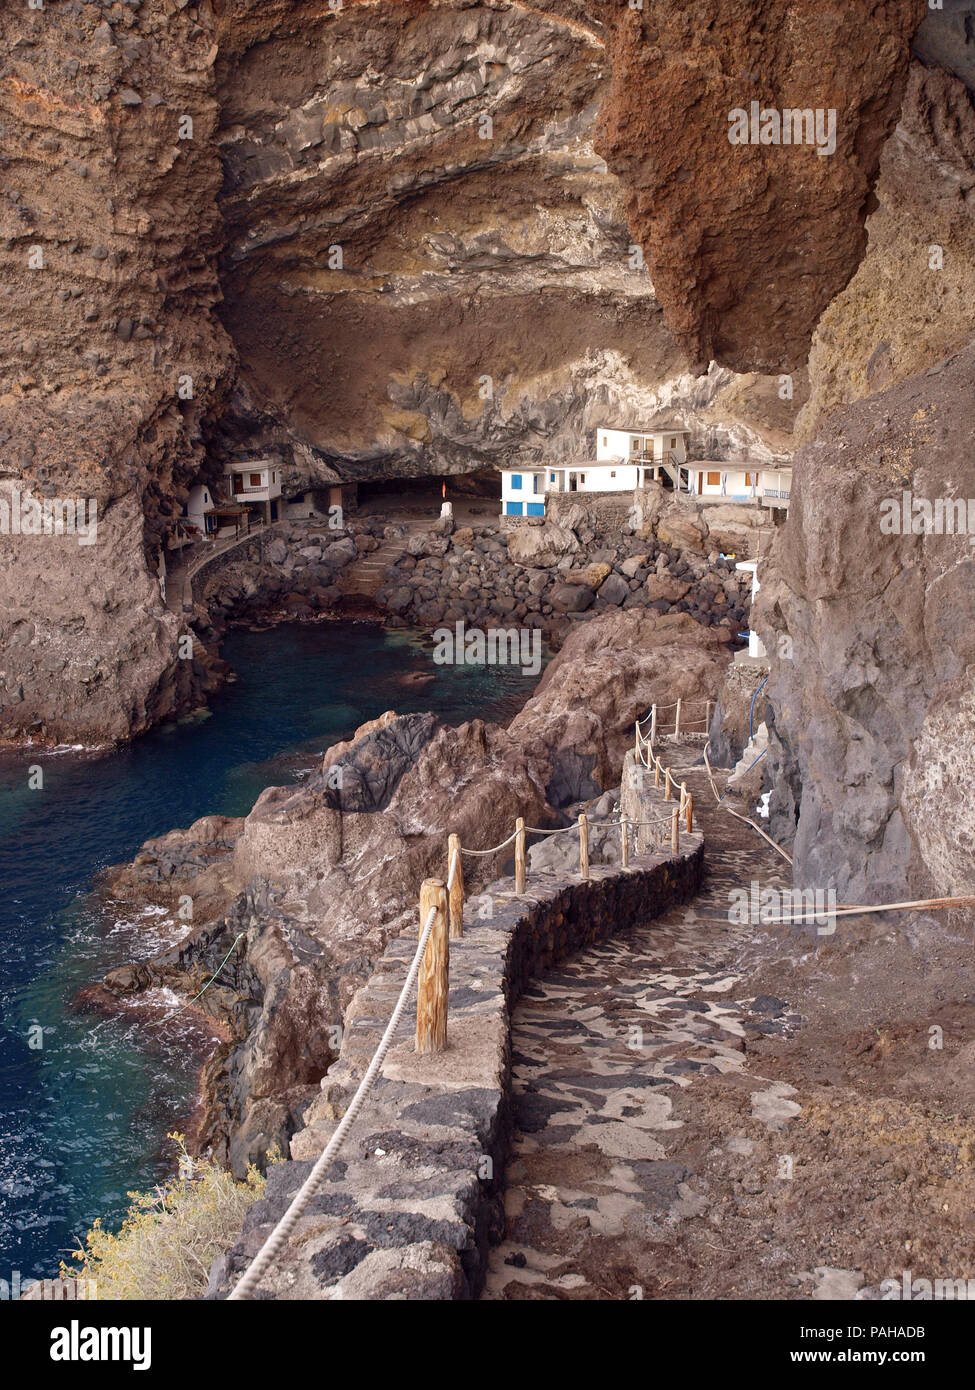 Prois de Candelaria , a collection of houses built into the base of overhanging cliffs on the Spanish Canary Island of La Palma Stock Photo